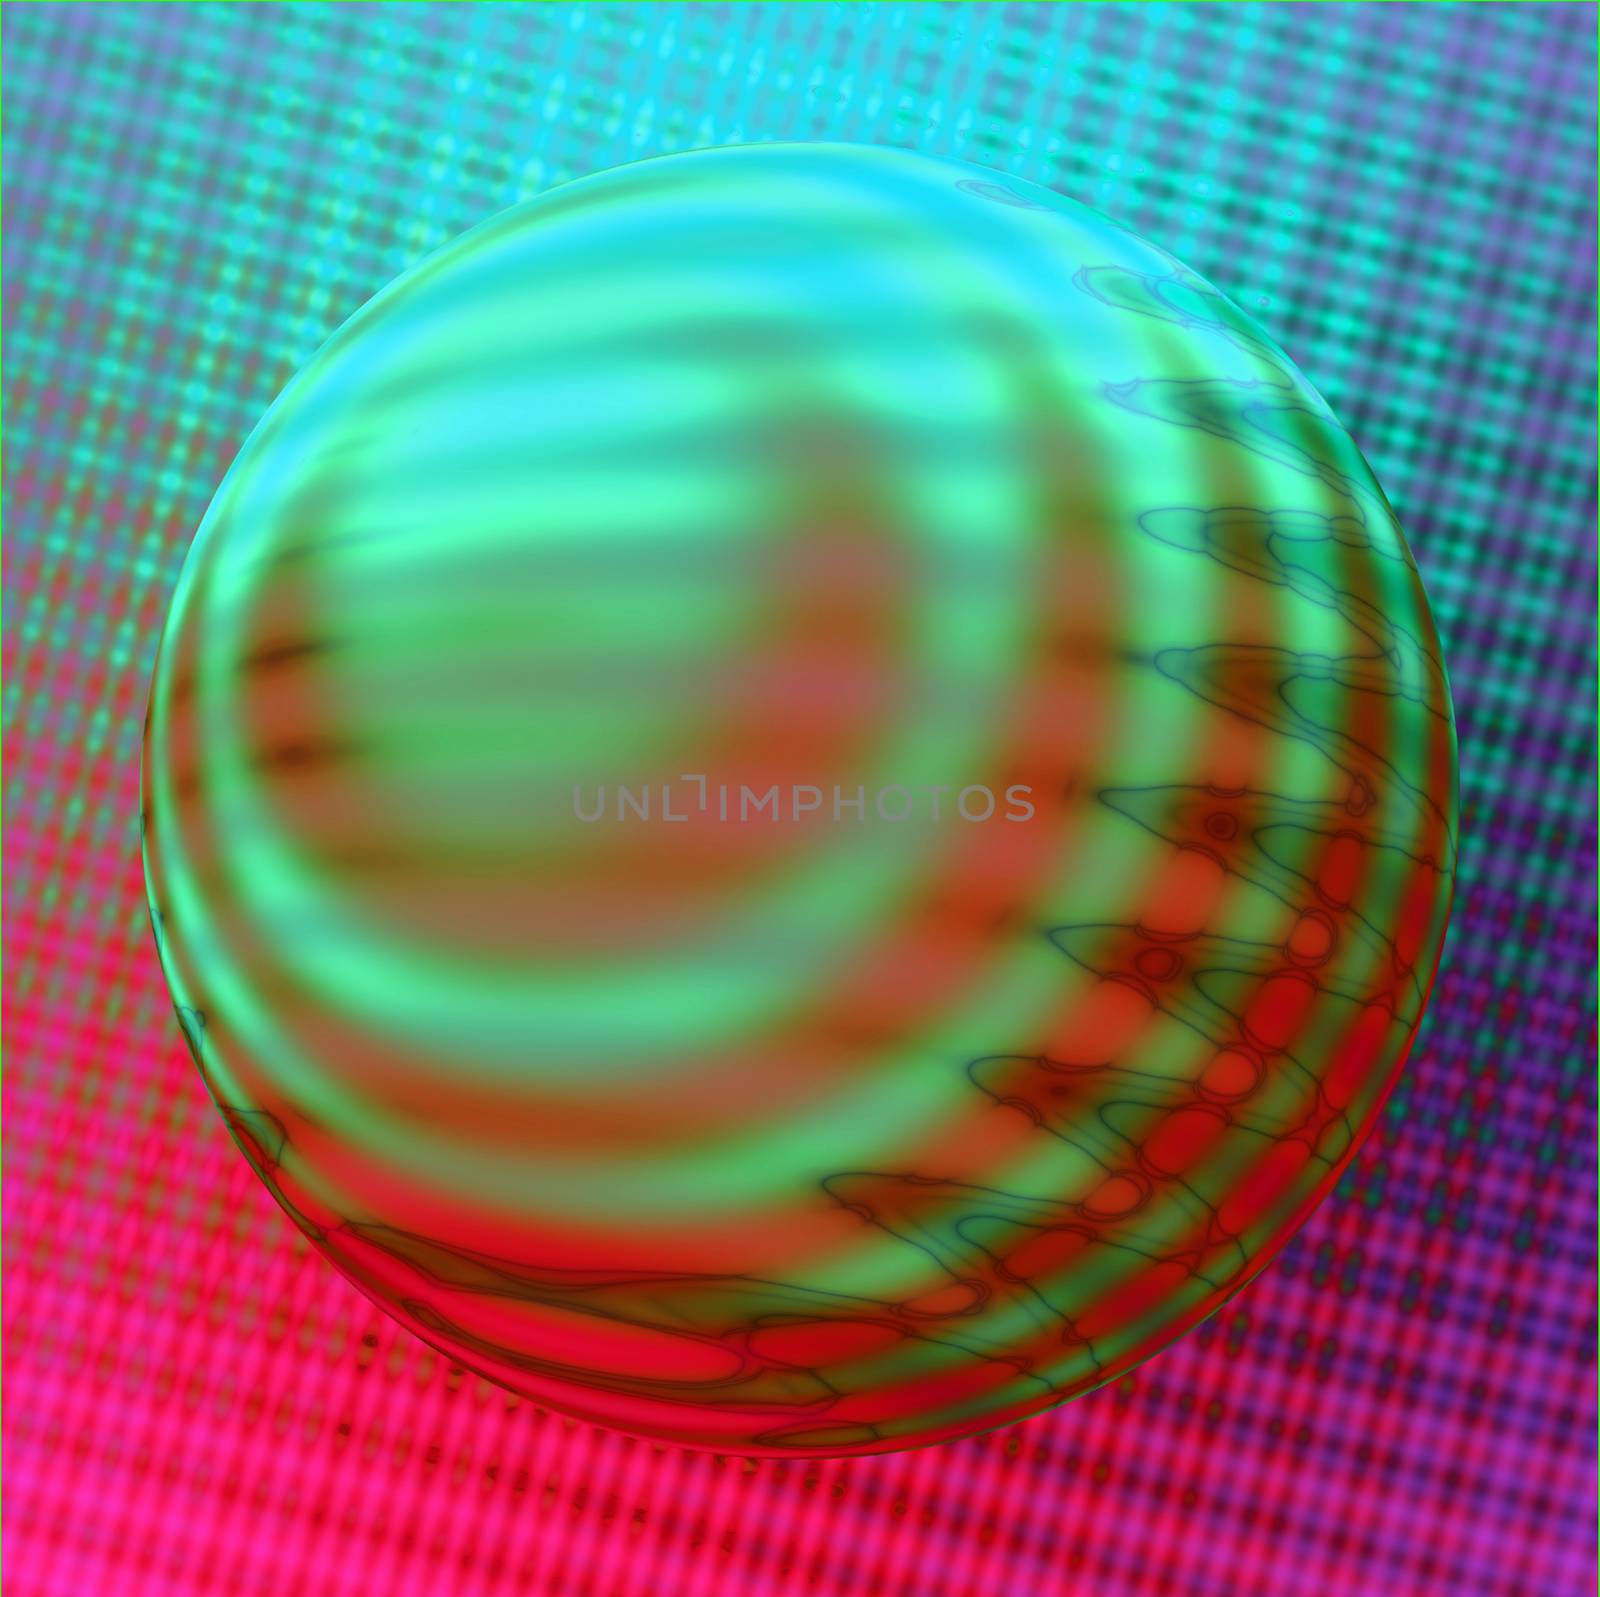 A brightly colored sphere against a patterned background.